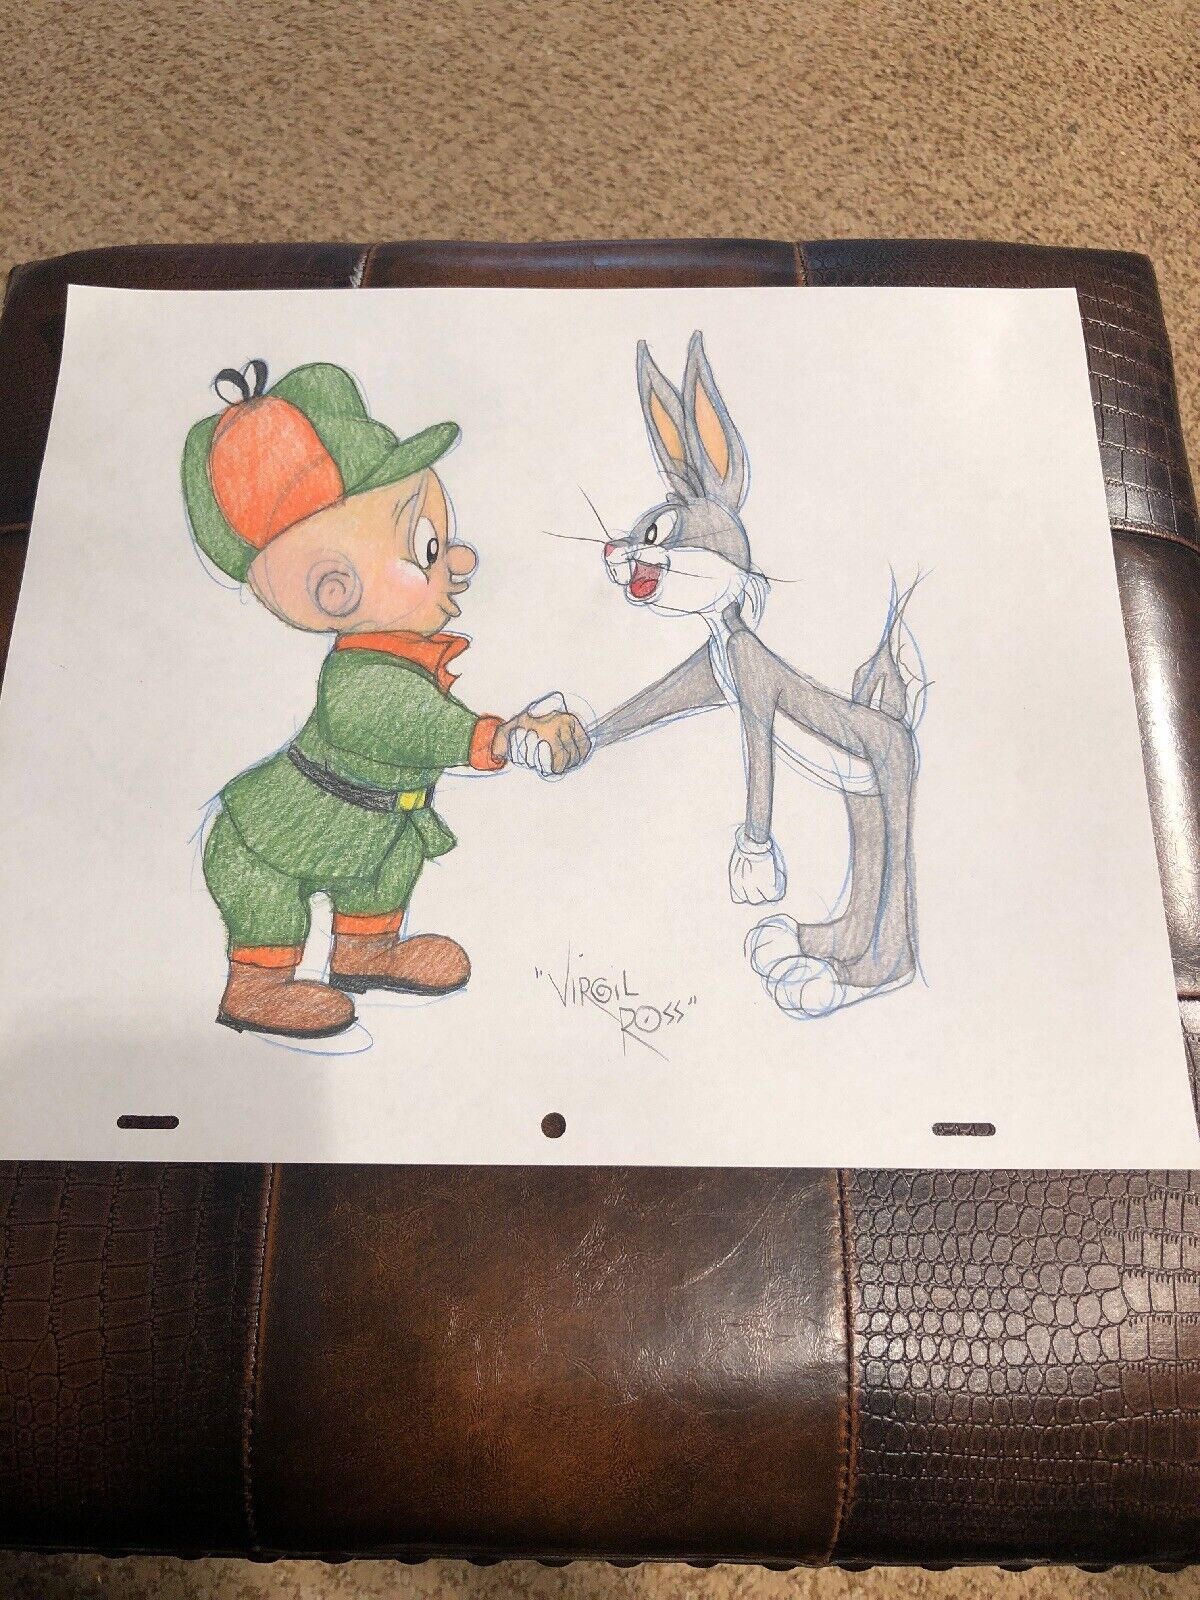 Virgil Ross Sketch - Bugs Bunny And Elmer Fudd Shaking Hands. Signed 12.5x10.5”